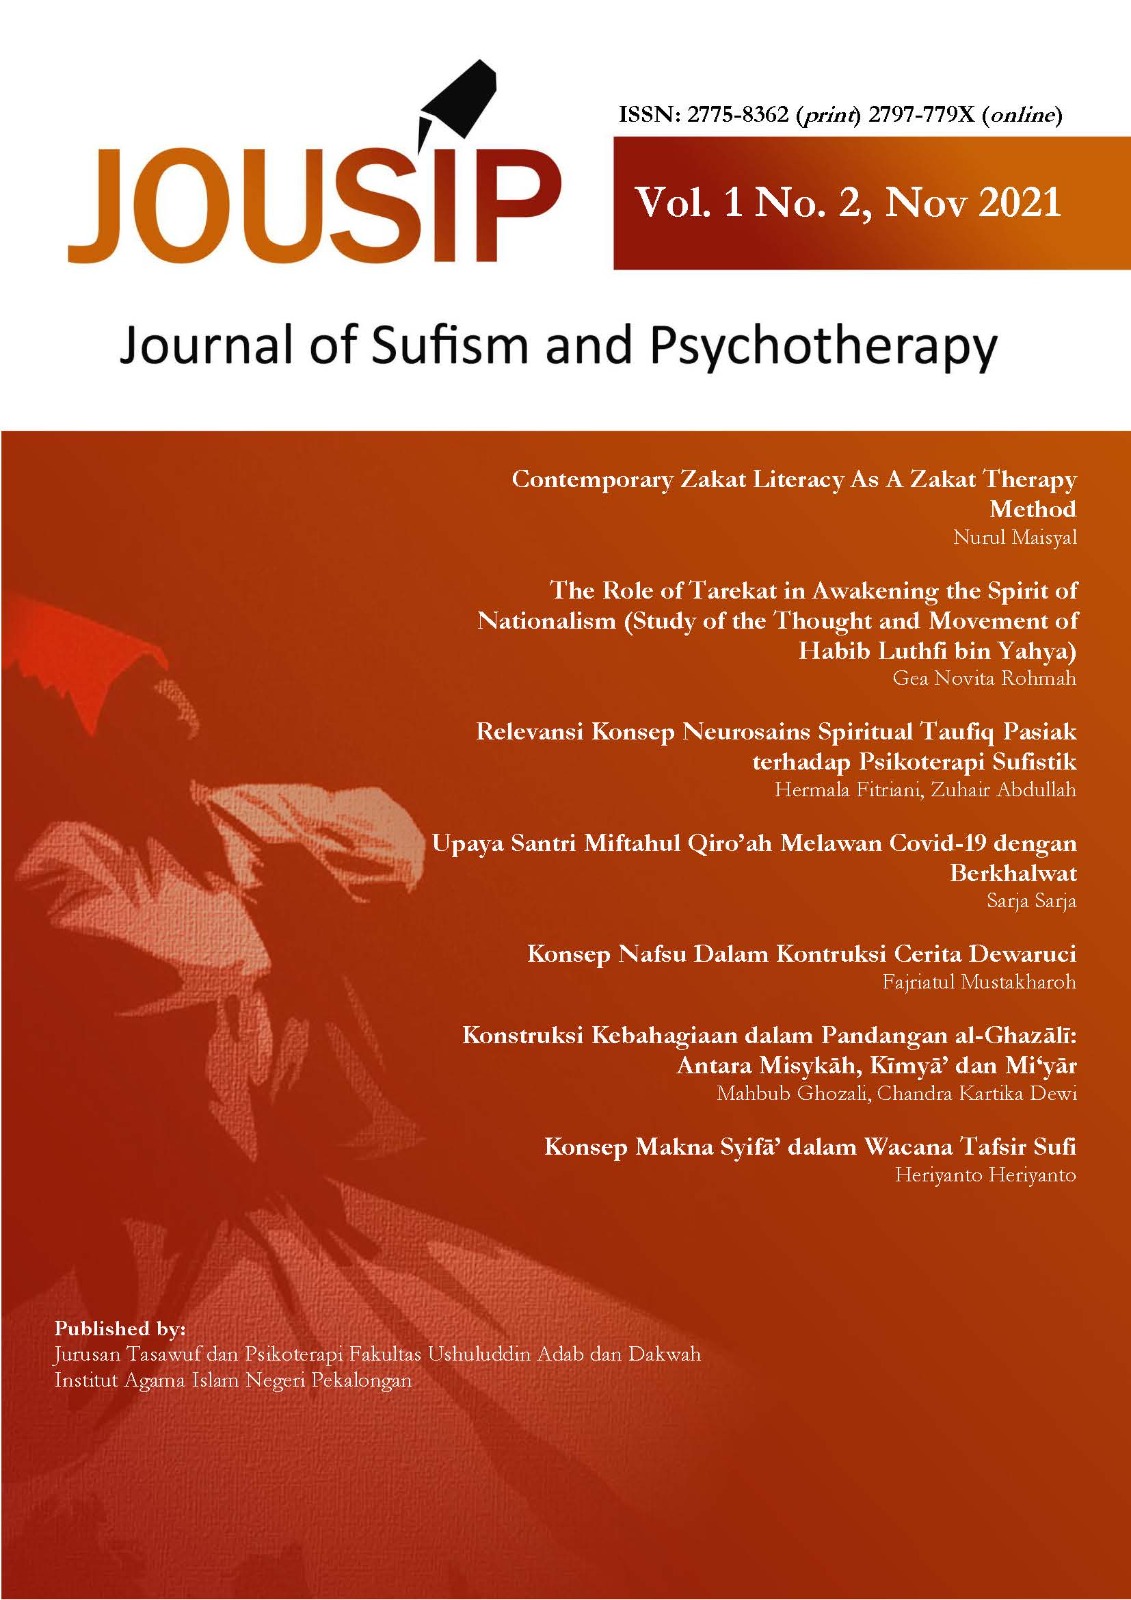 					View Vol. 1 No. 2 (2021): JOUSIP: Journal of Sufism and Psychotherapy, Vol. 1 No. 2, November 2021; Author Geographical: Indonesia.
				